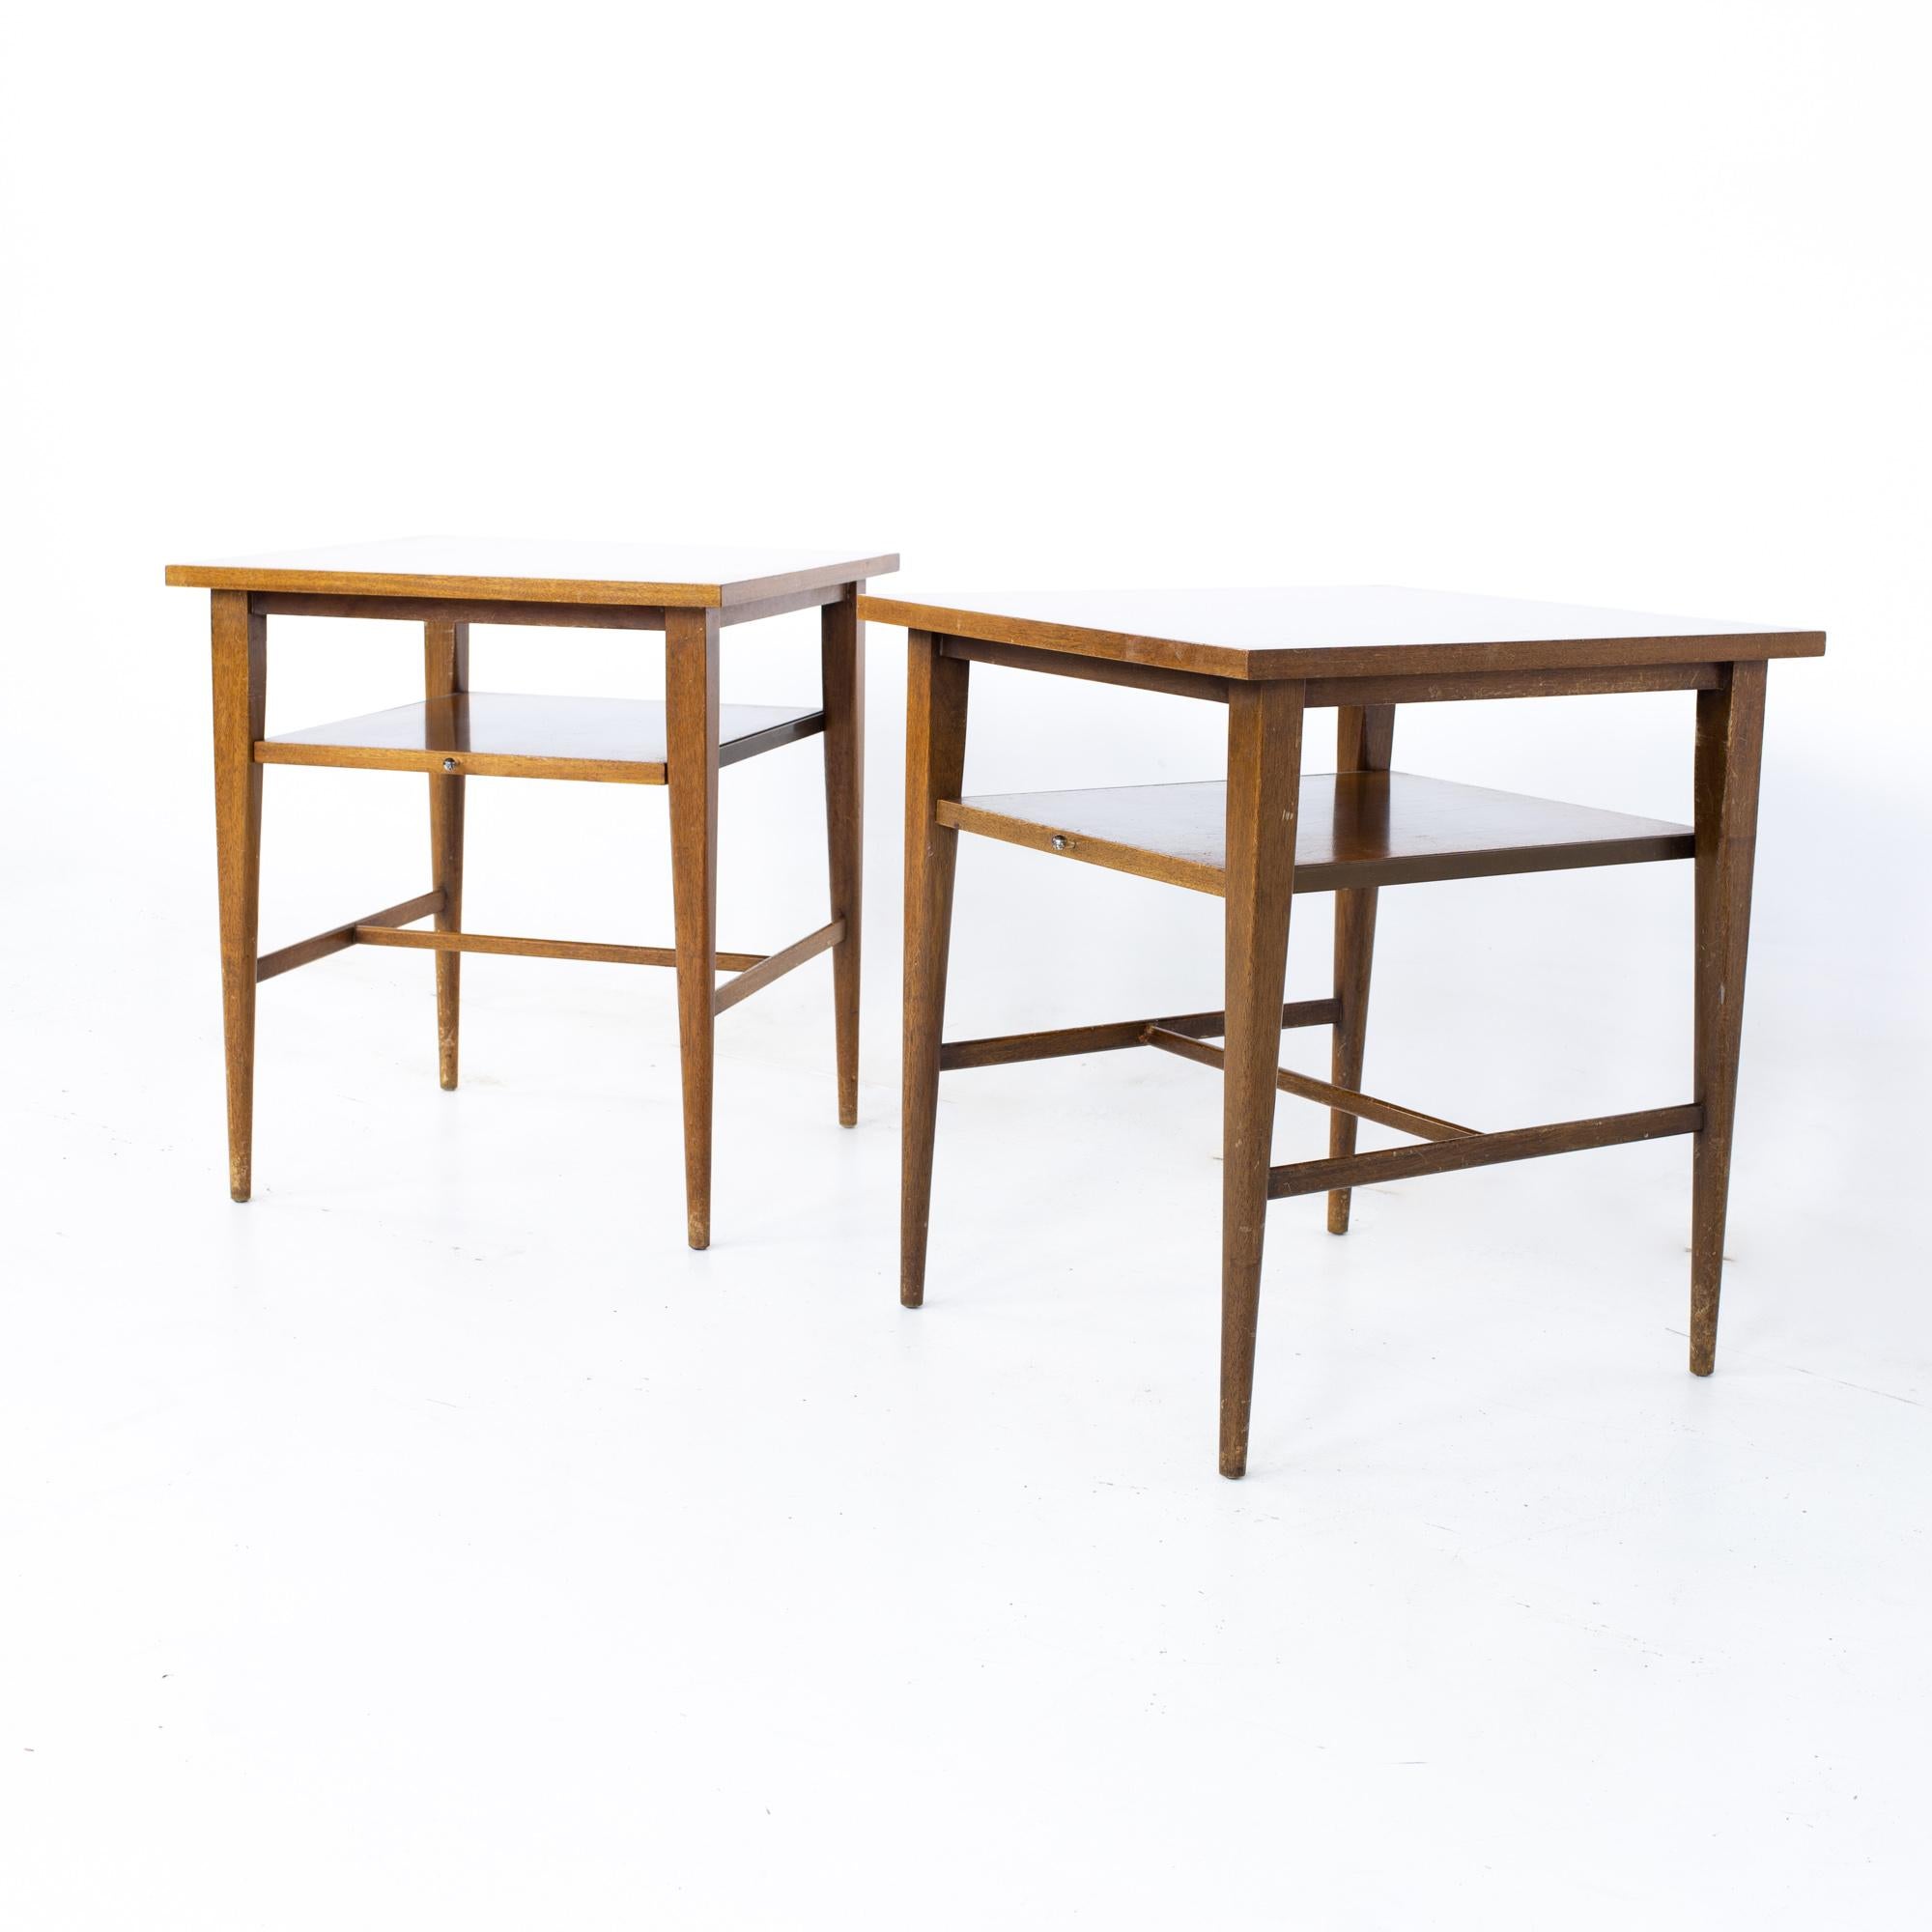 Paul McCobb for Calvin Mid Century Side End Tables - Pair
Each table measures: 21.25 wide x 22.25 deep x 24 inches high

All pieces of furniture can be had in what we call restored vintage condition. That means the piece is restored upon purchase so